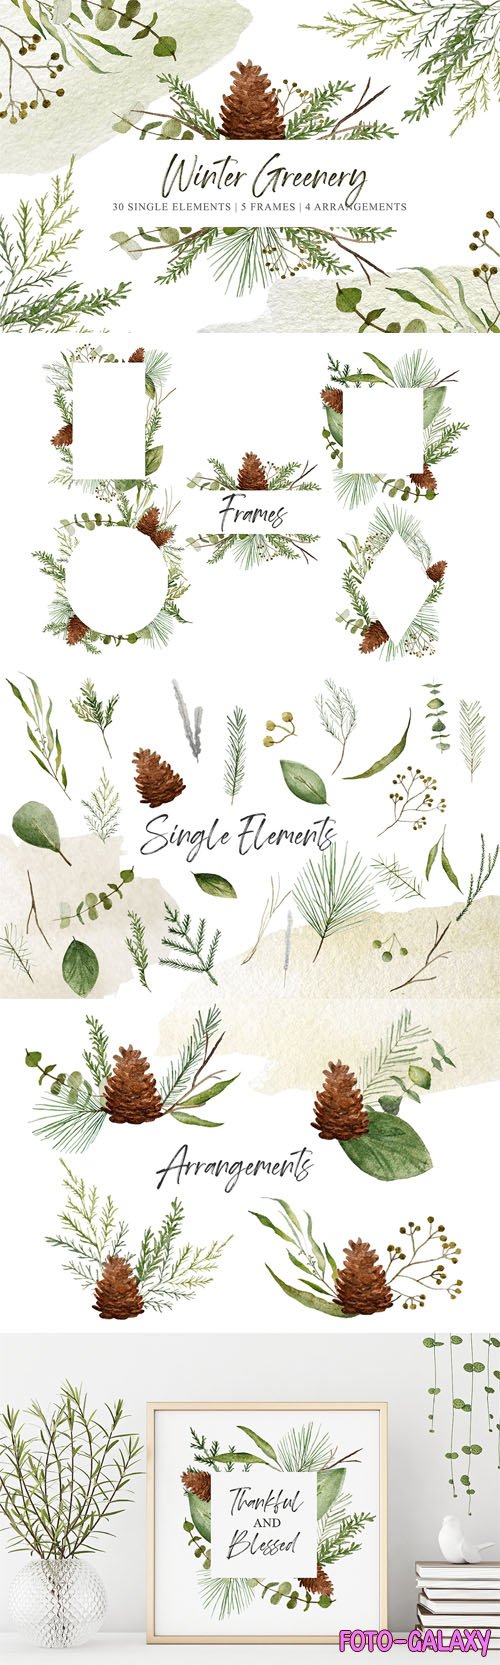 Watercolor Winter Greenery PNG Cliparts Pack